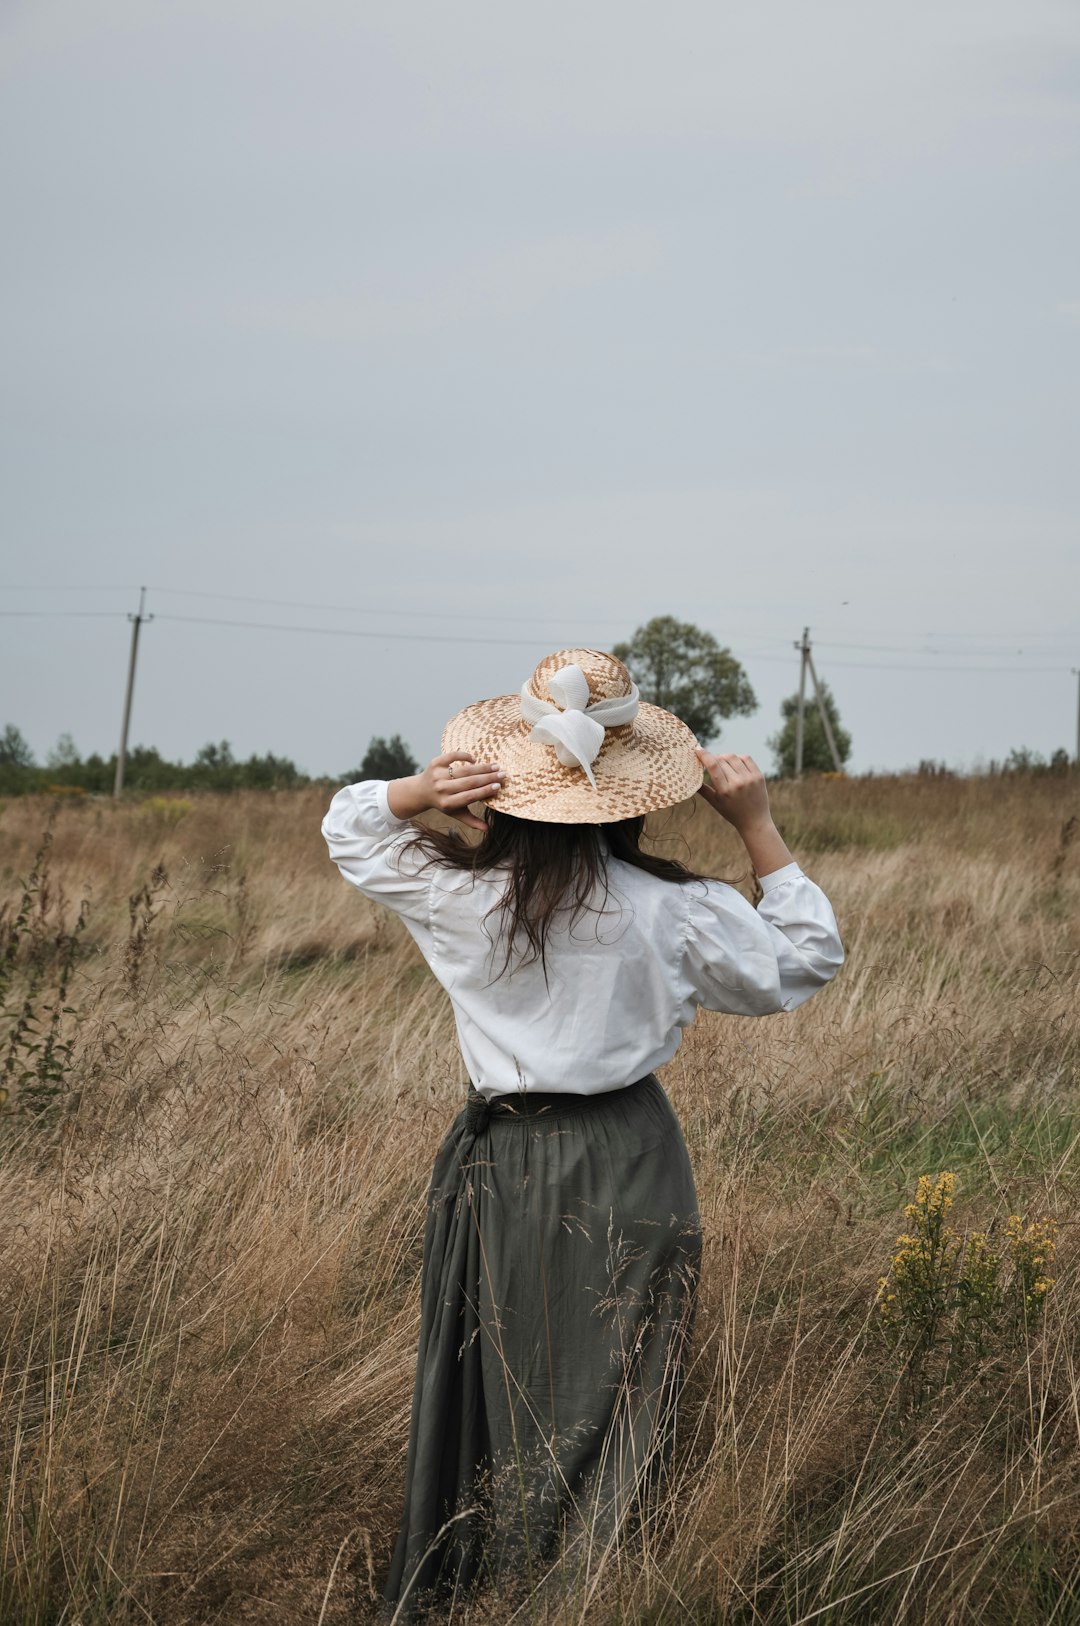 woman standing and touching her hat on grass field